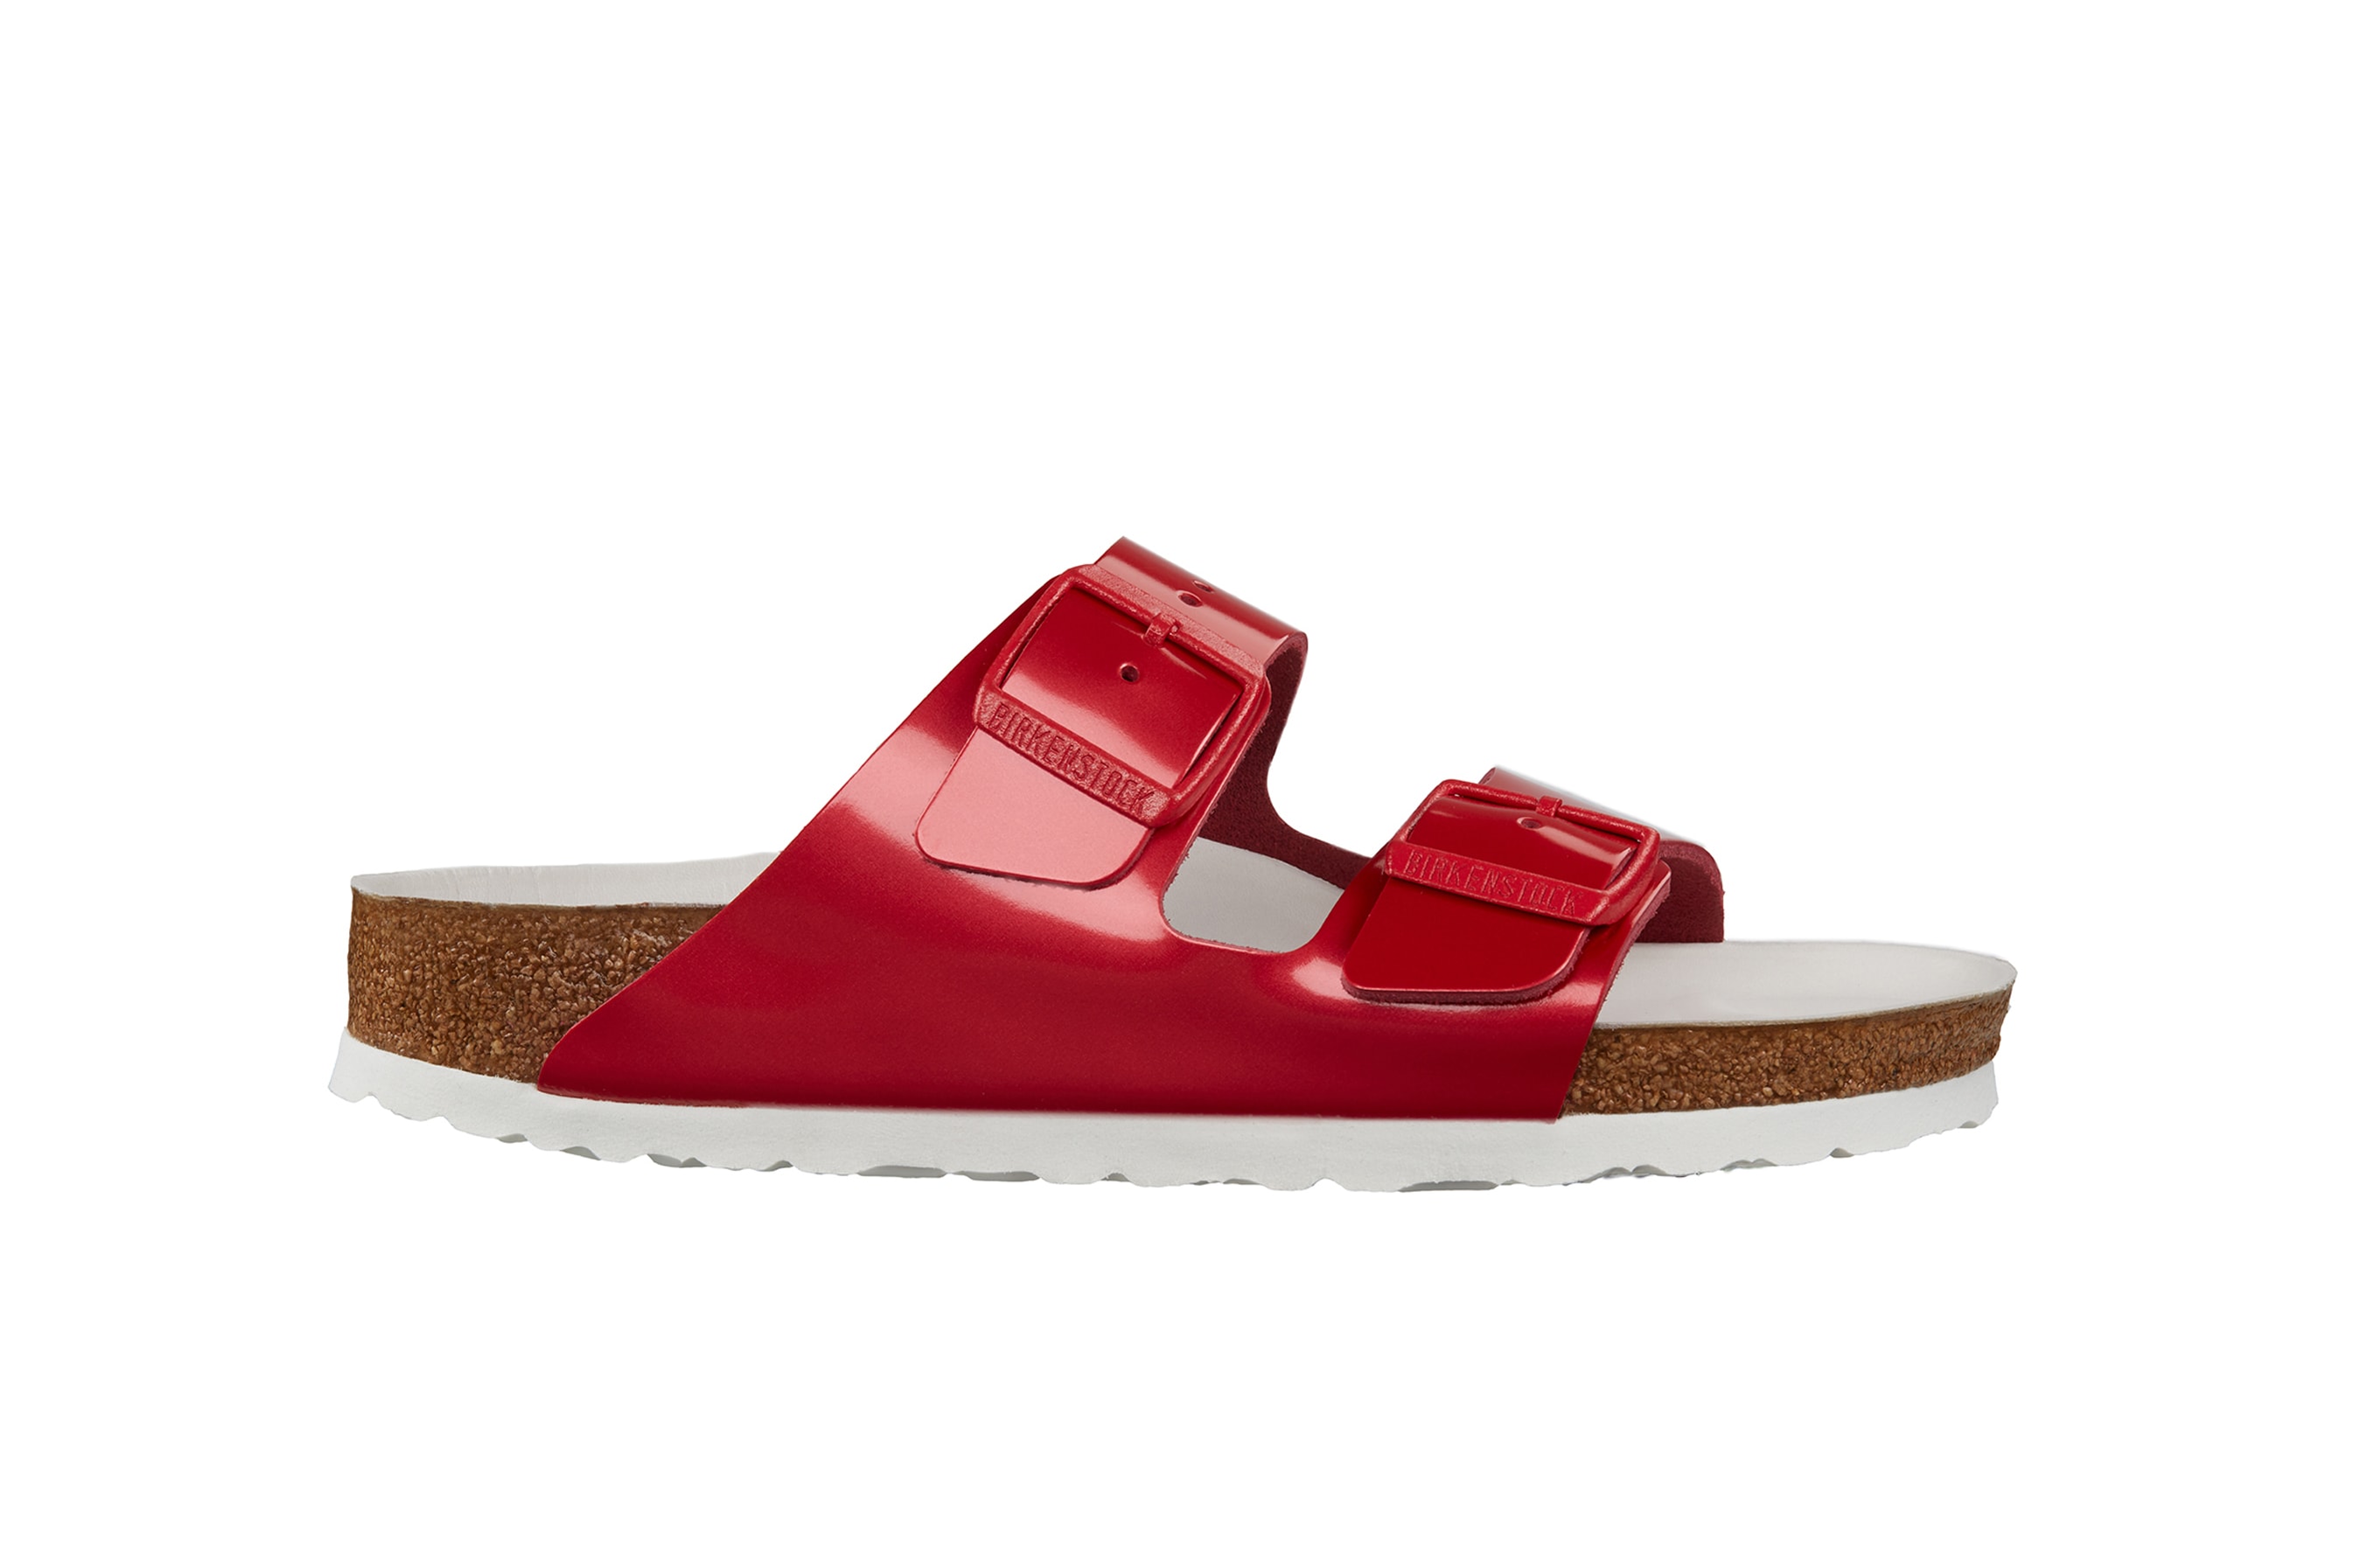 Birkenstock Limited Edition Sweetheart Capsule Collection Sandals Red Pink White Valentines Day